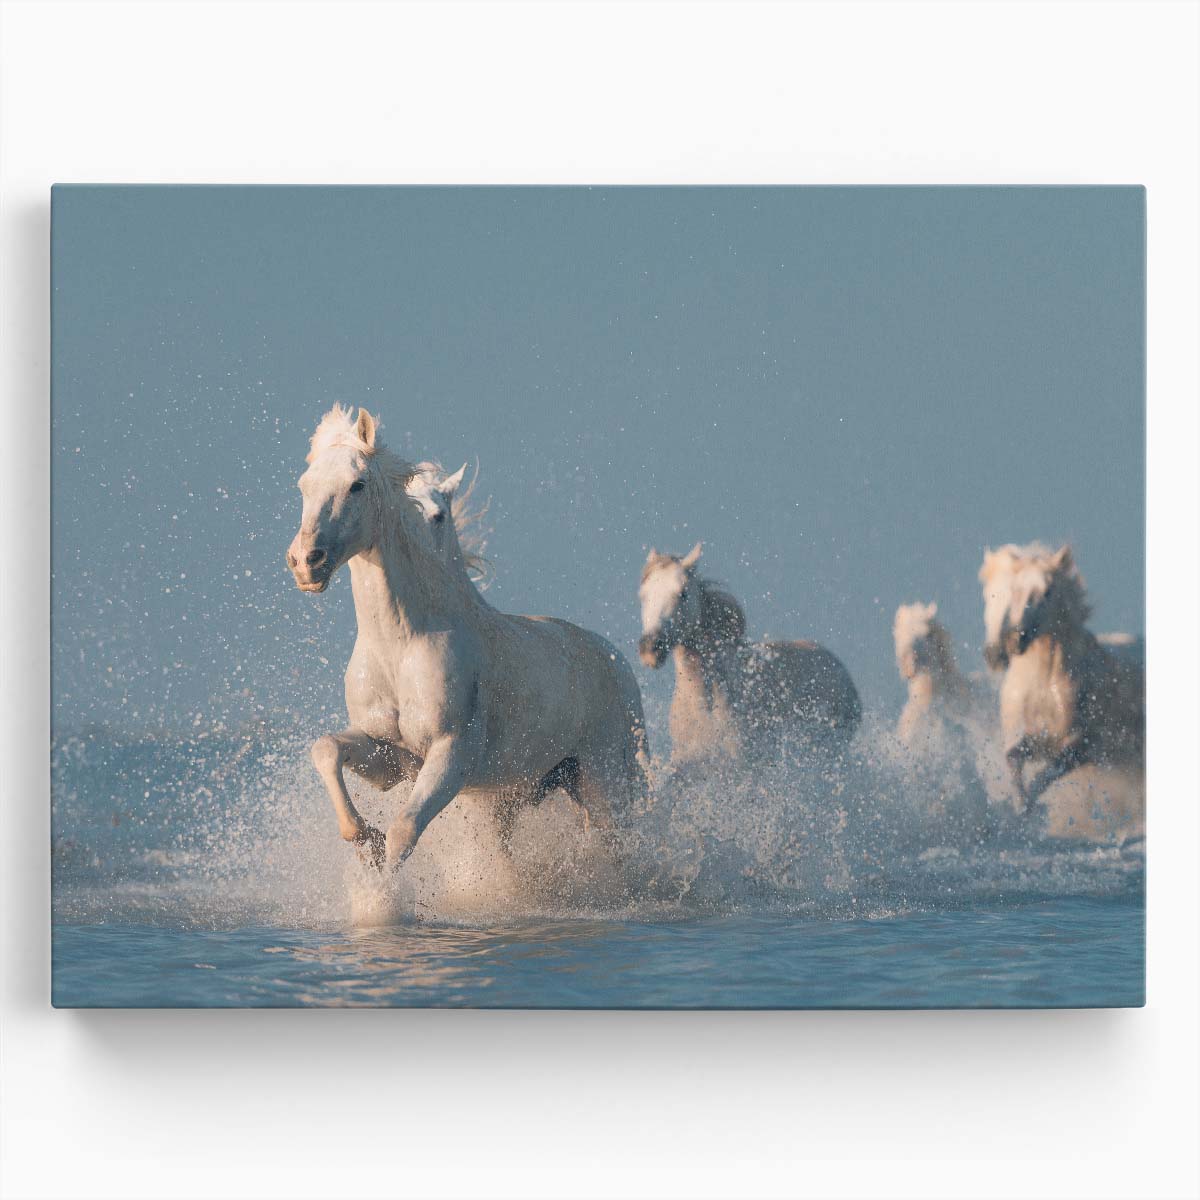 Majestic Camargue Horses in Sunset Sprint Wall Art by Luxuriance Designs. Made in USA.